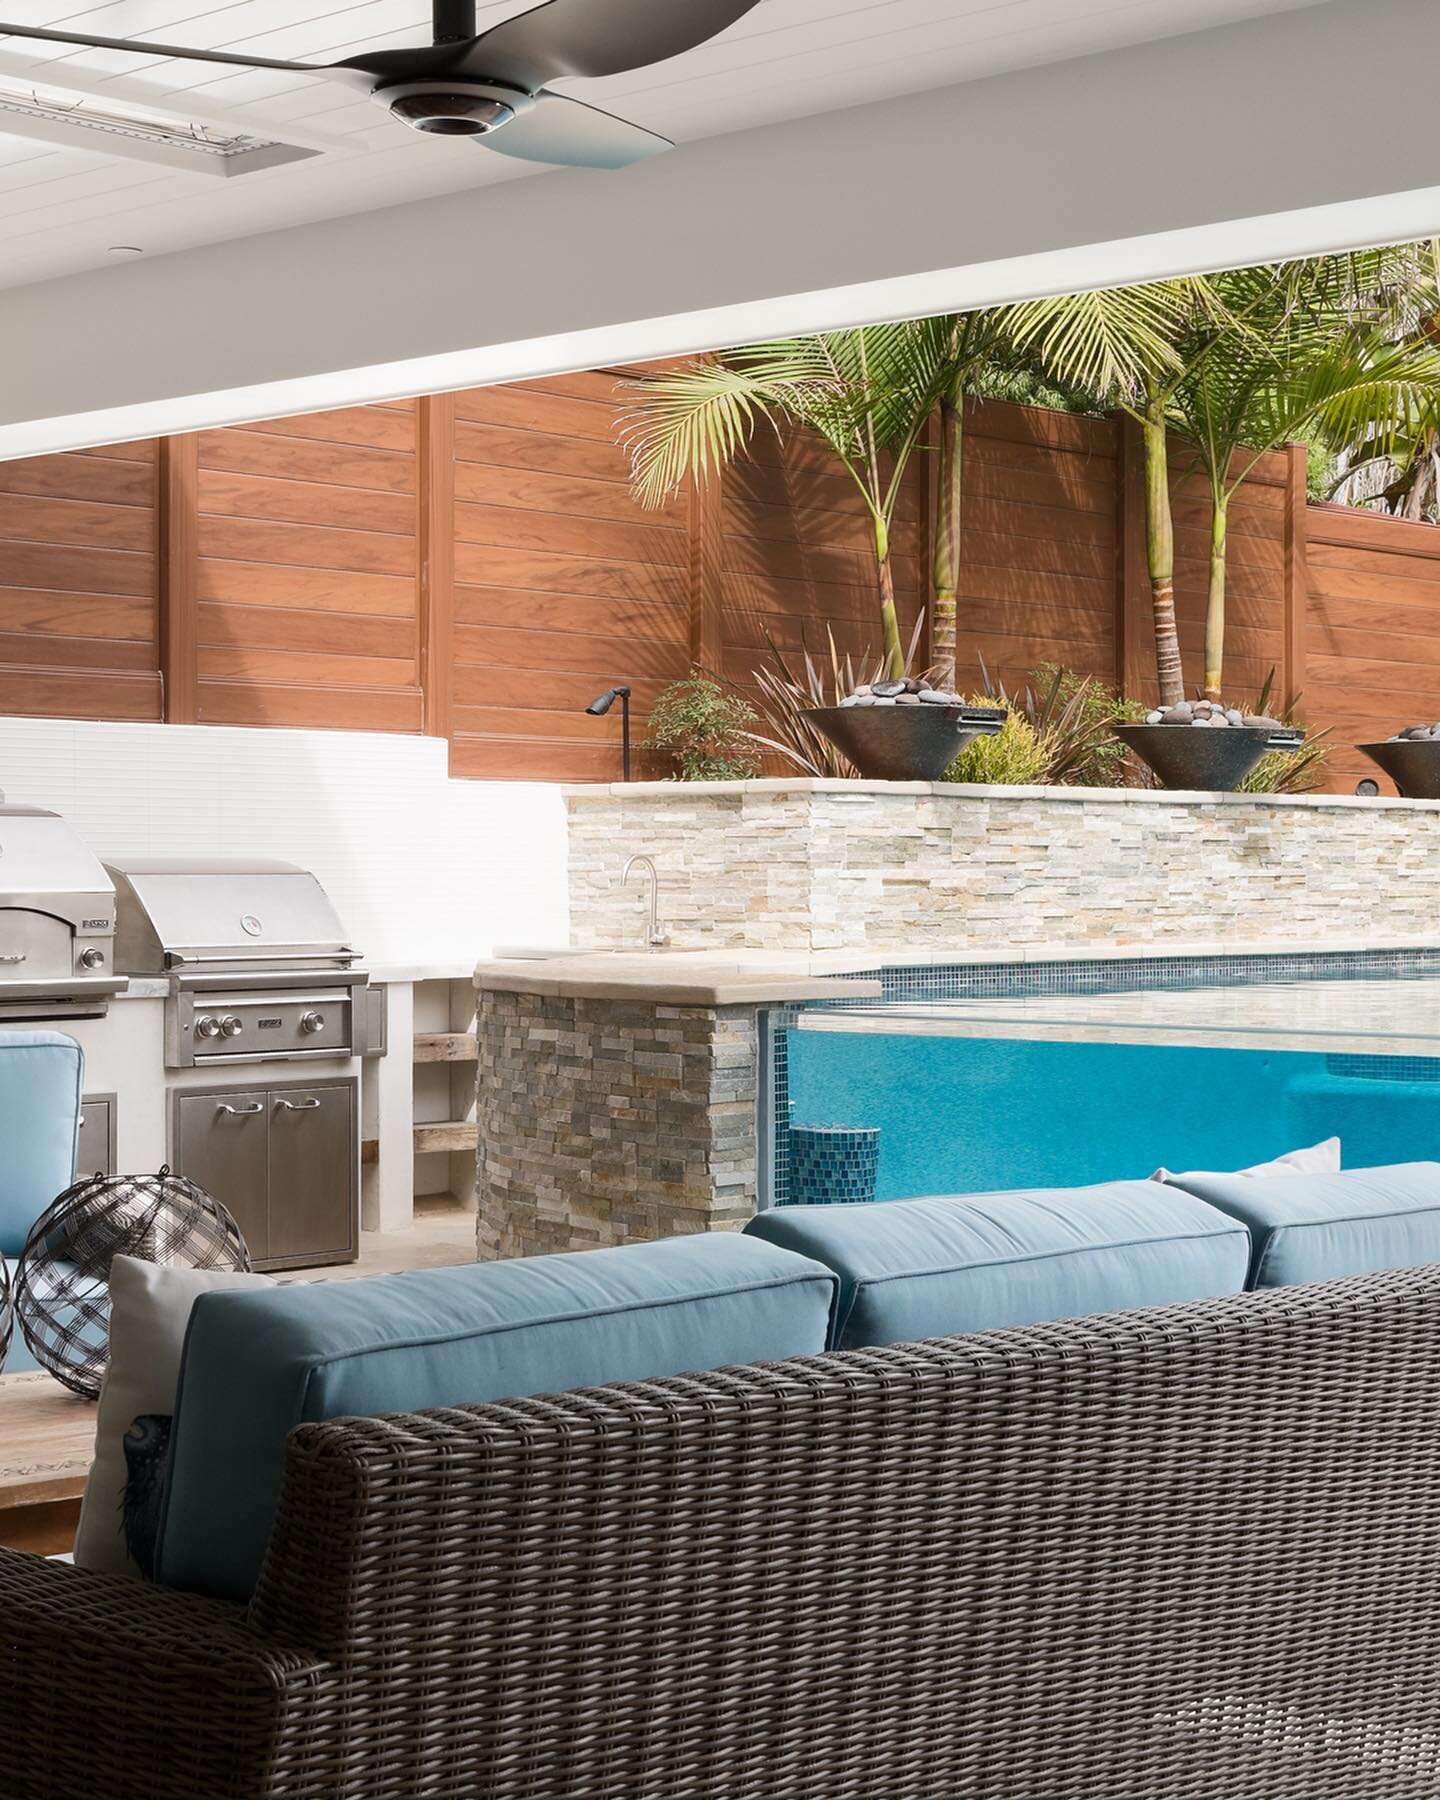 Stay at Home Summer Vibes!
Is your backyard ready? DM us if you need help converting your backyard to your personal resort!

Vision and Sound

#visionandsound #manhattanbeach #manhattanbeachhomes #hermosabeach #palosverdes #palosverdesestates #beverl